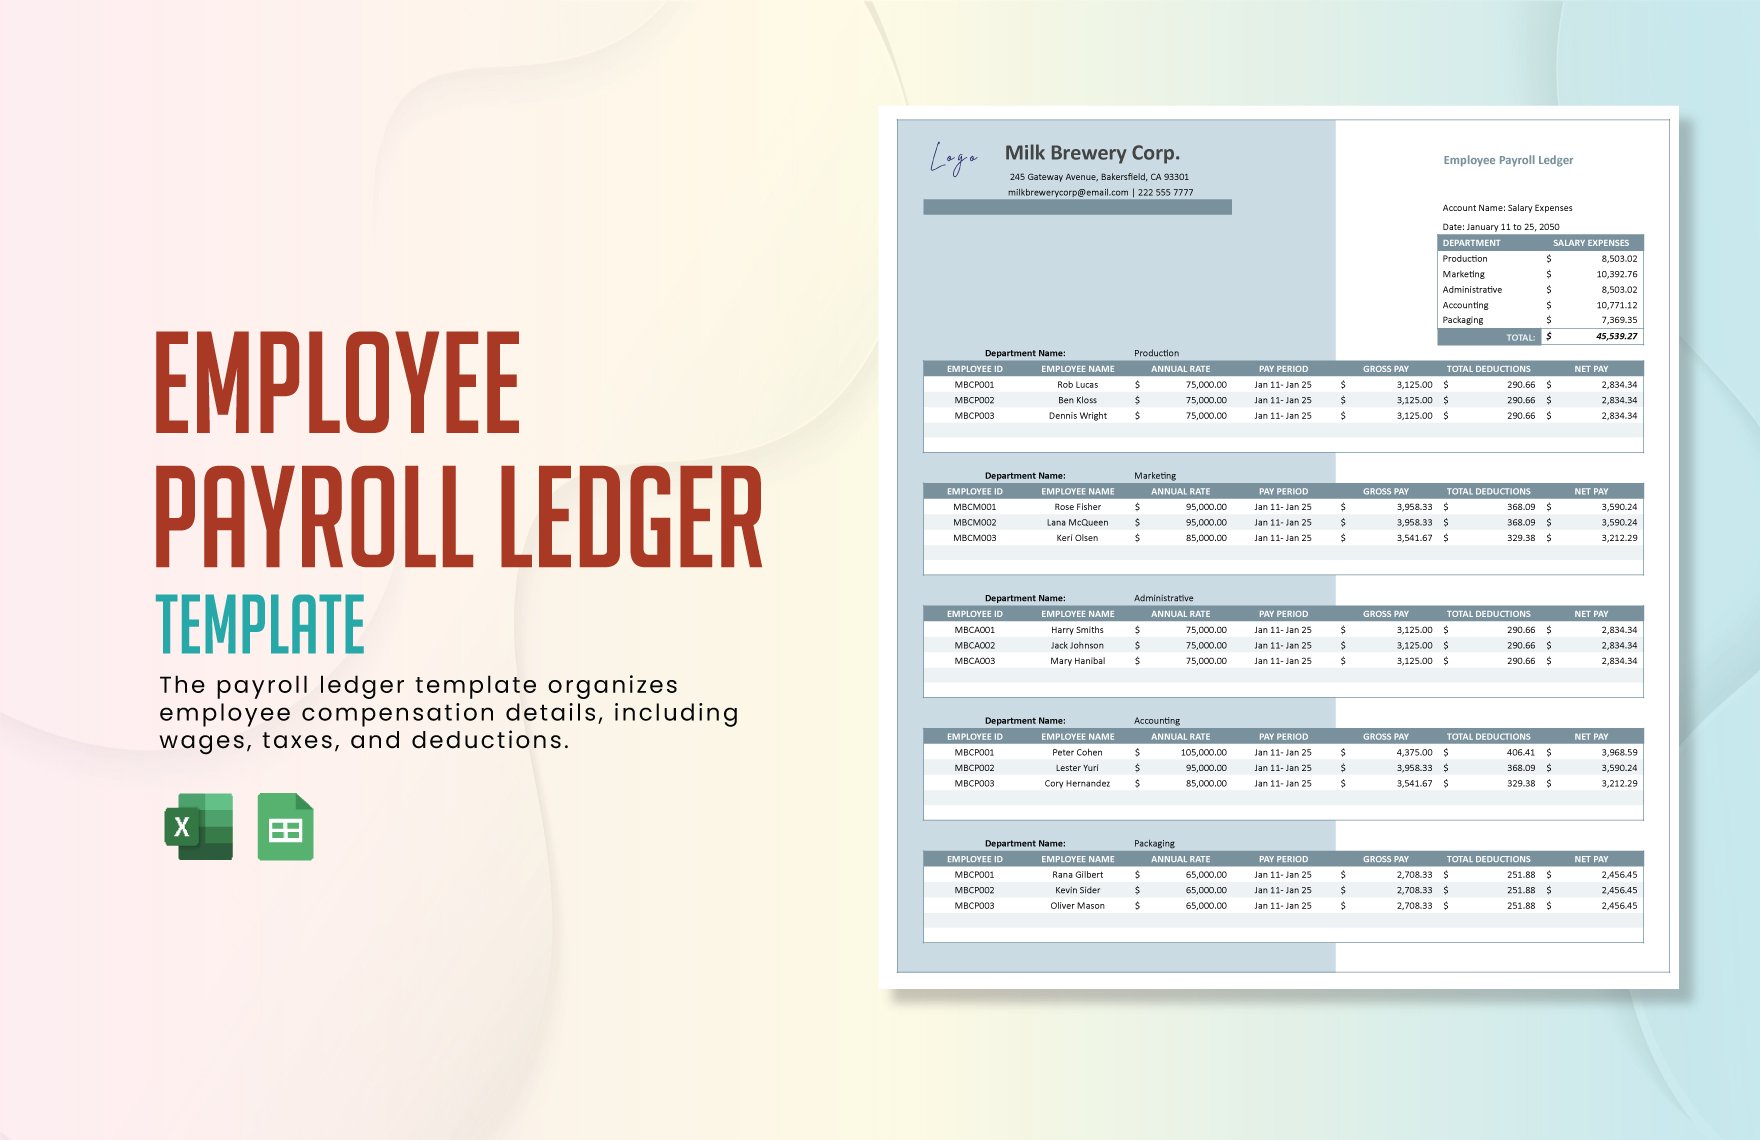 Employee Payroll Ledger Template in Excel, Google Sheets